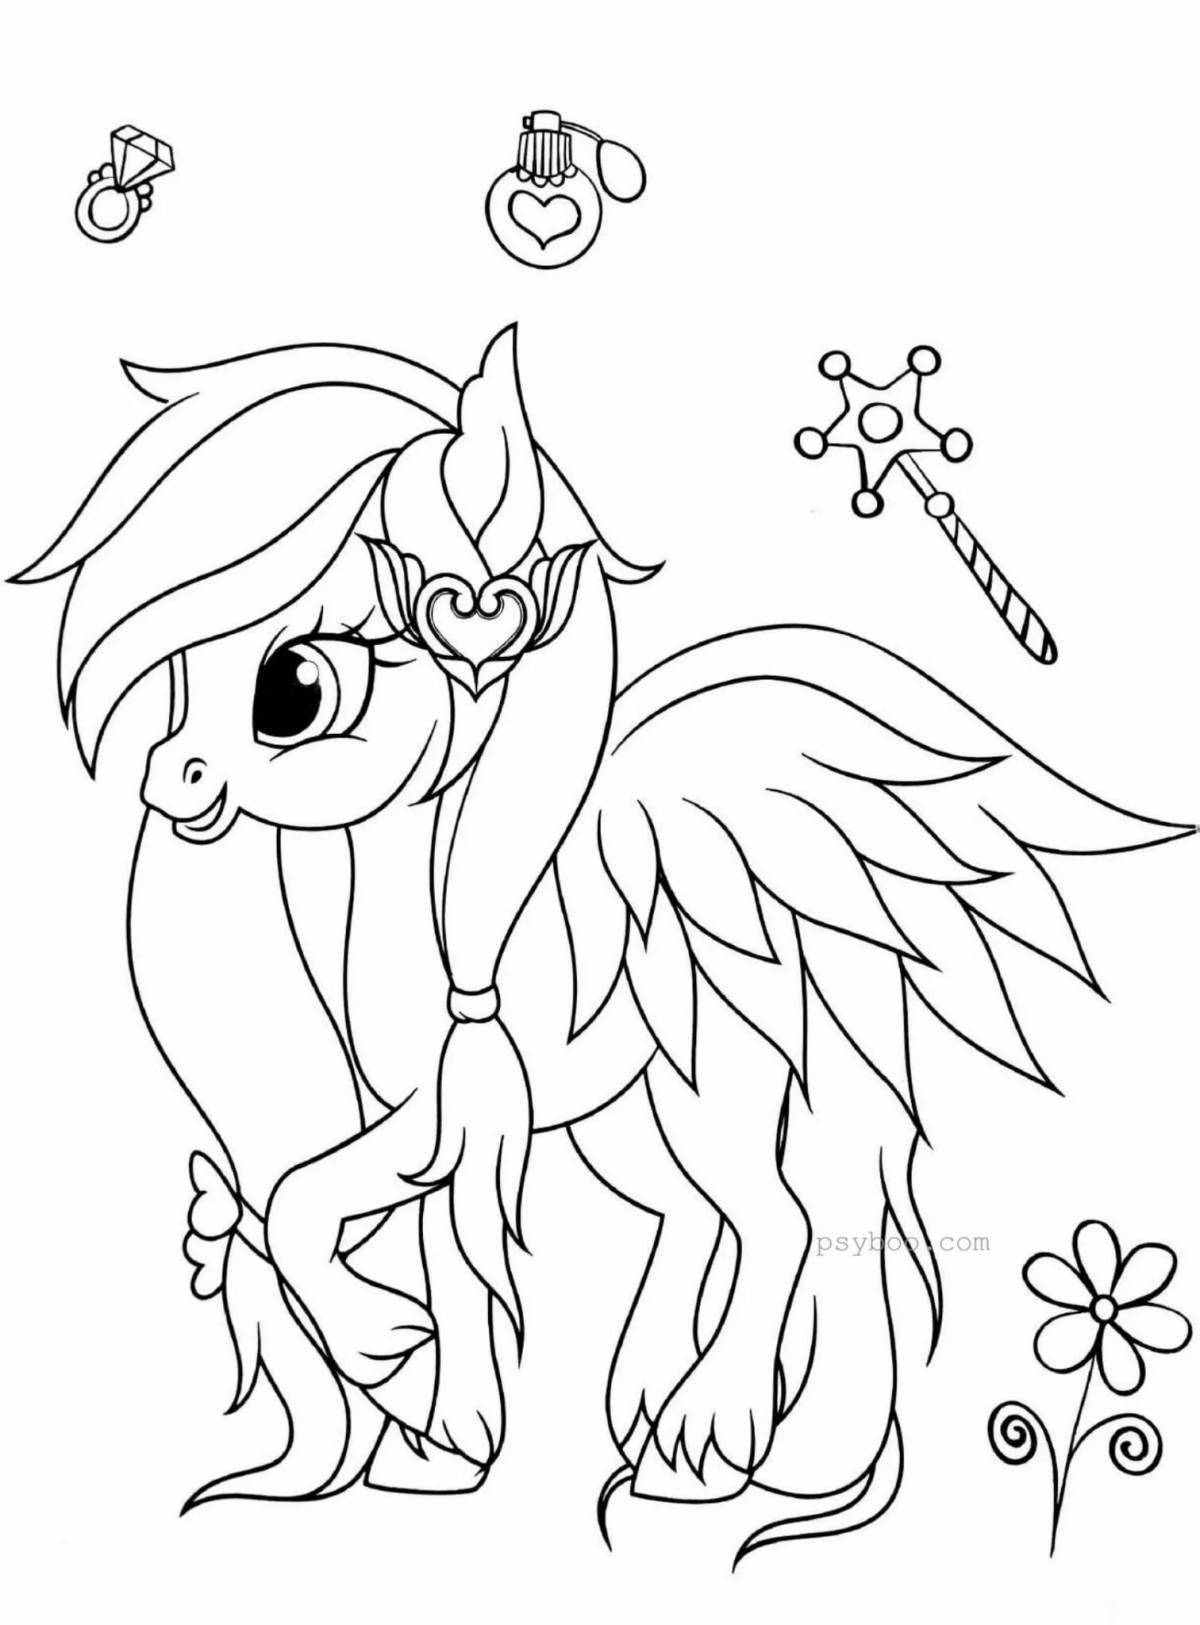 Coloring book brave pony for children 4-5 years old